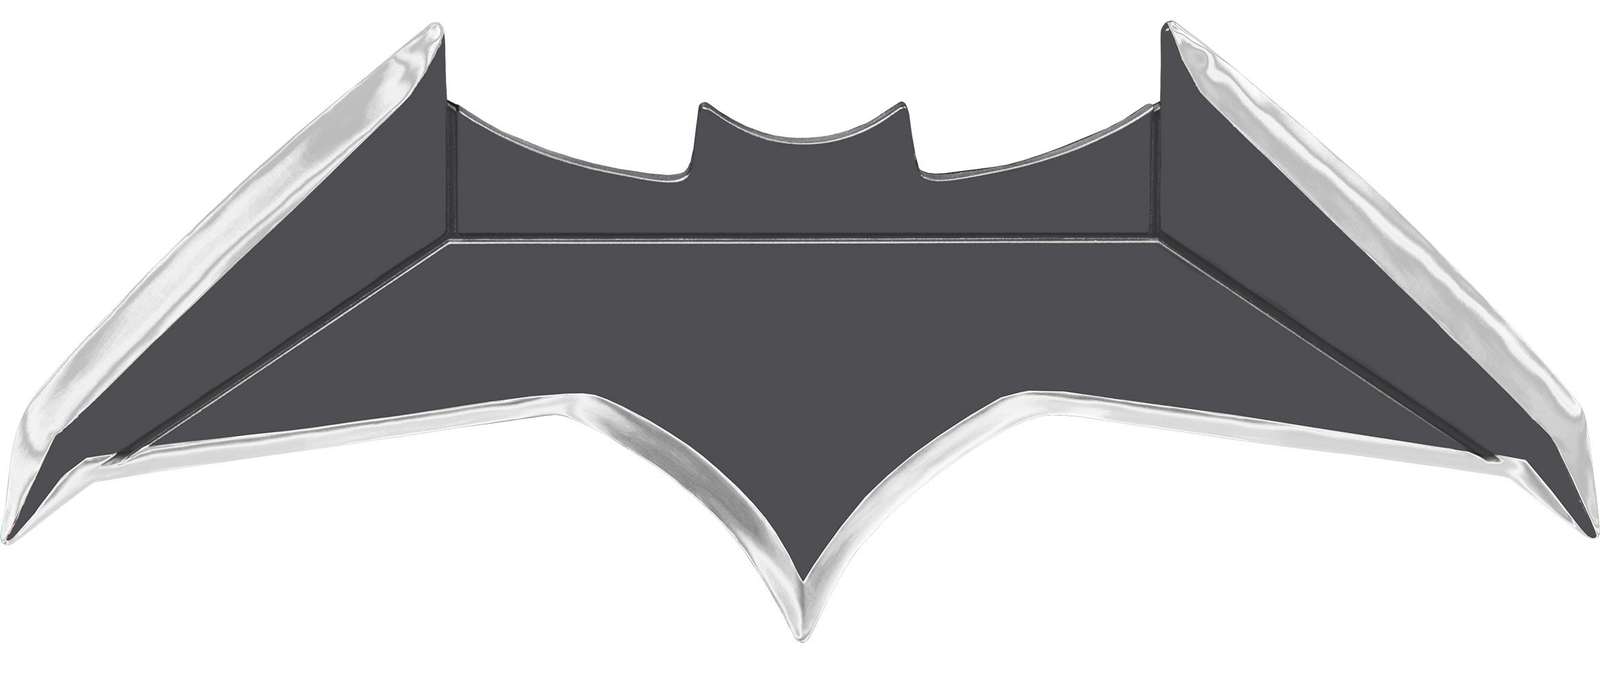 Batarang puzzle online from photo